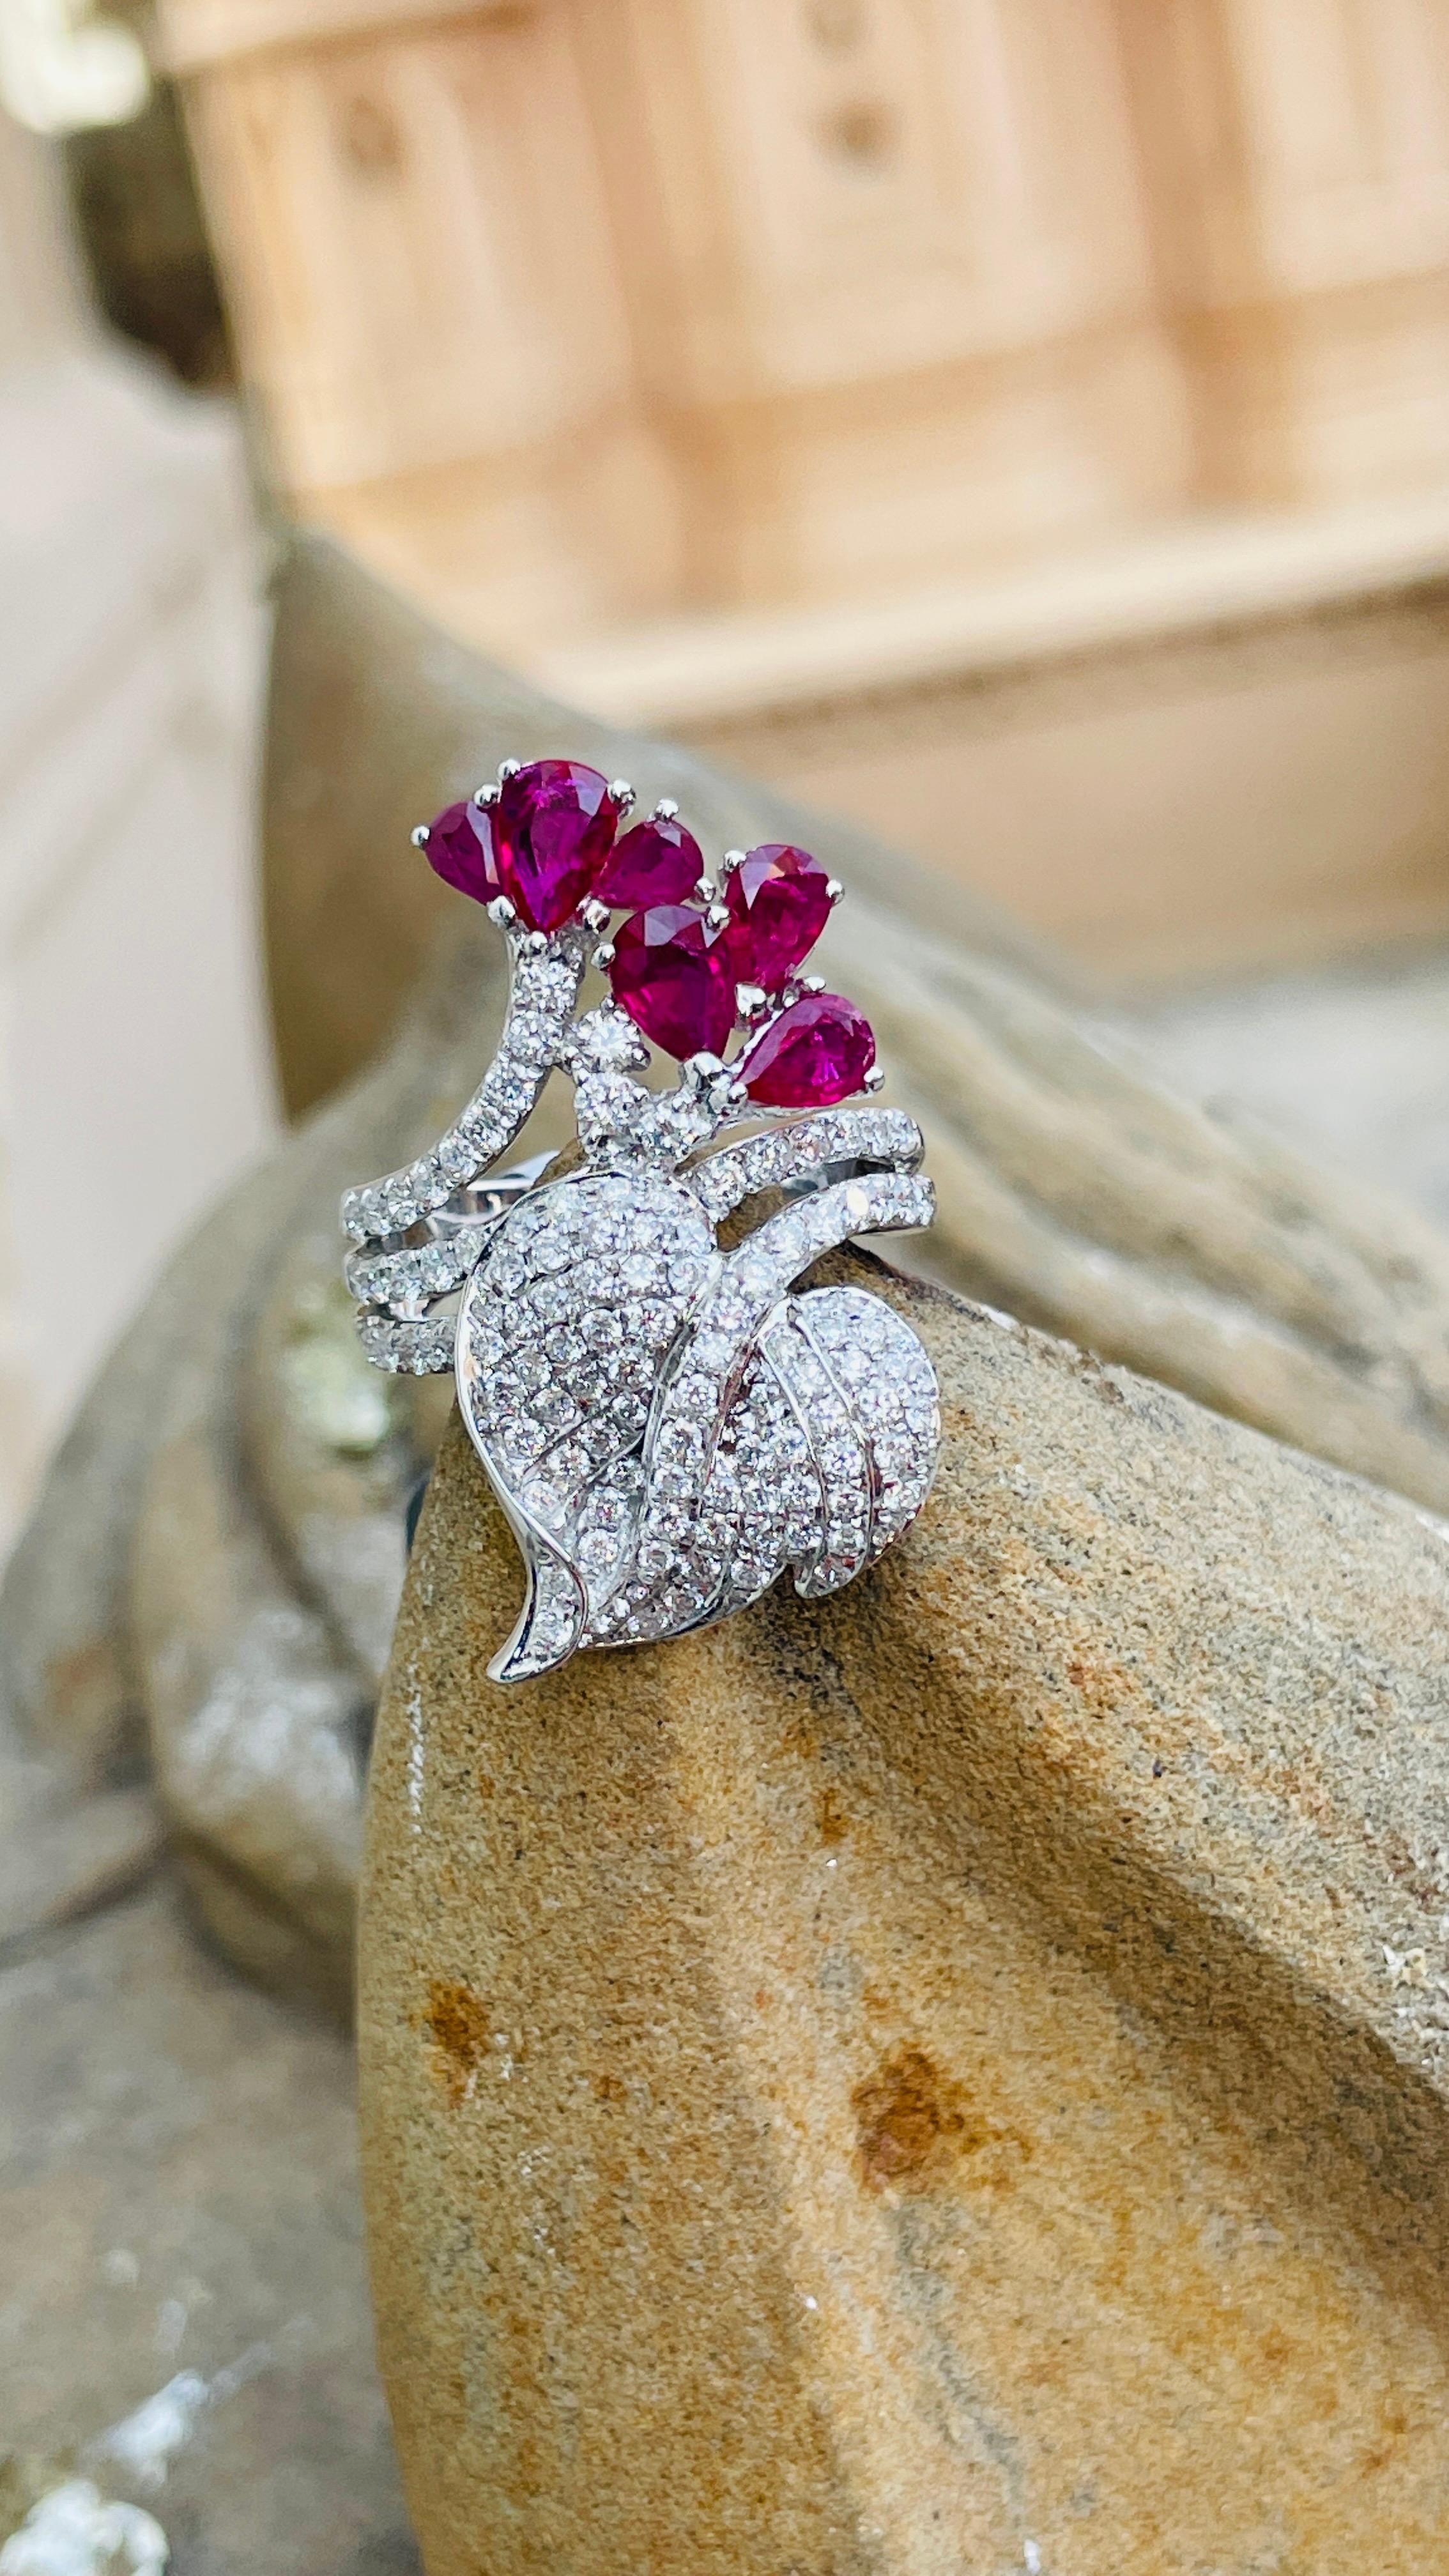 For Sale:  14K White Gold Pear Cut Ruby and Diamond Bridal Ring 2